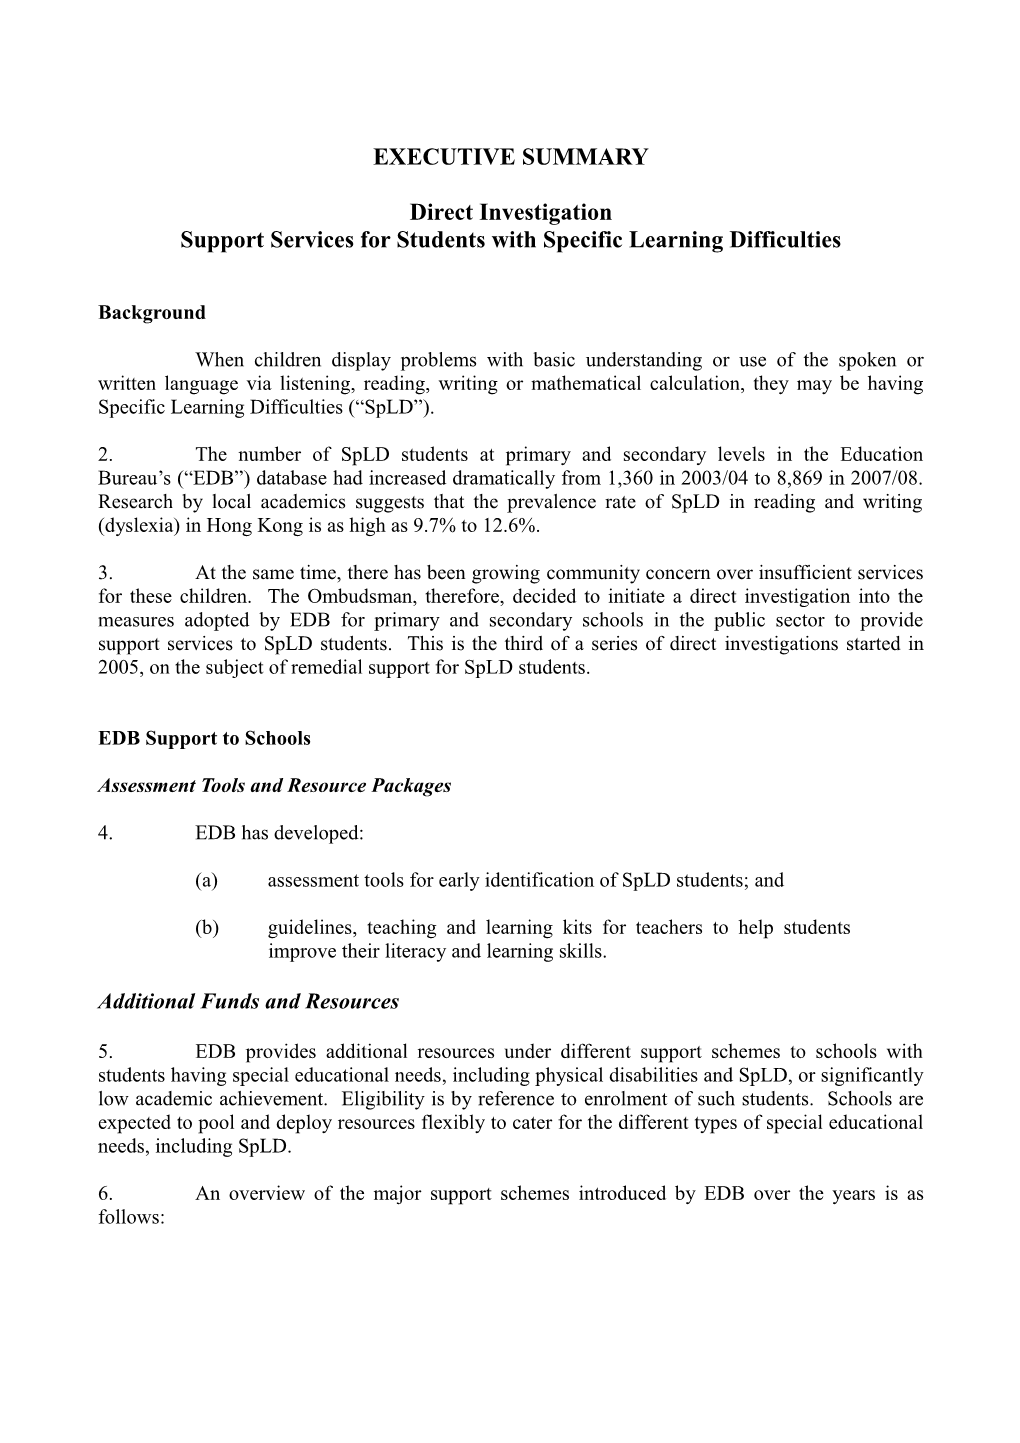 Support Services for Students with Specific Learning Difficulties